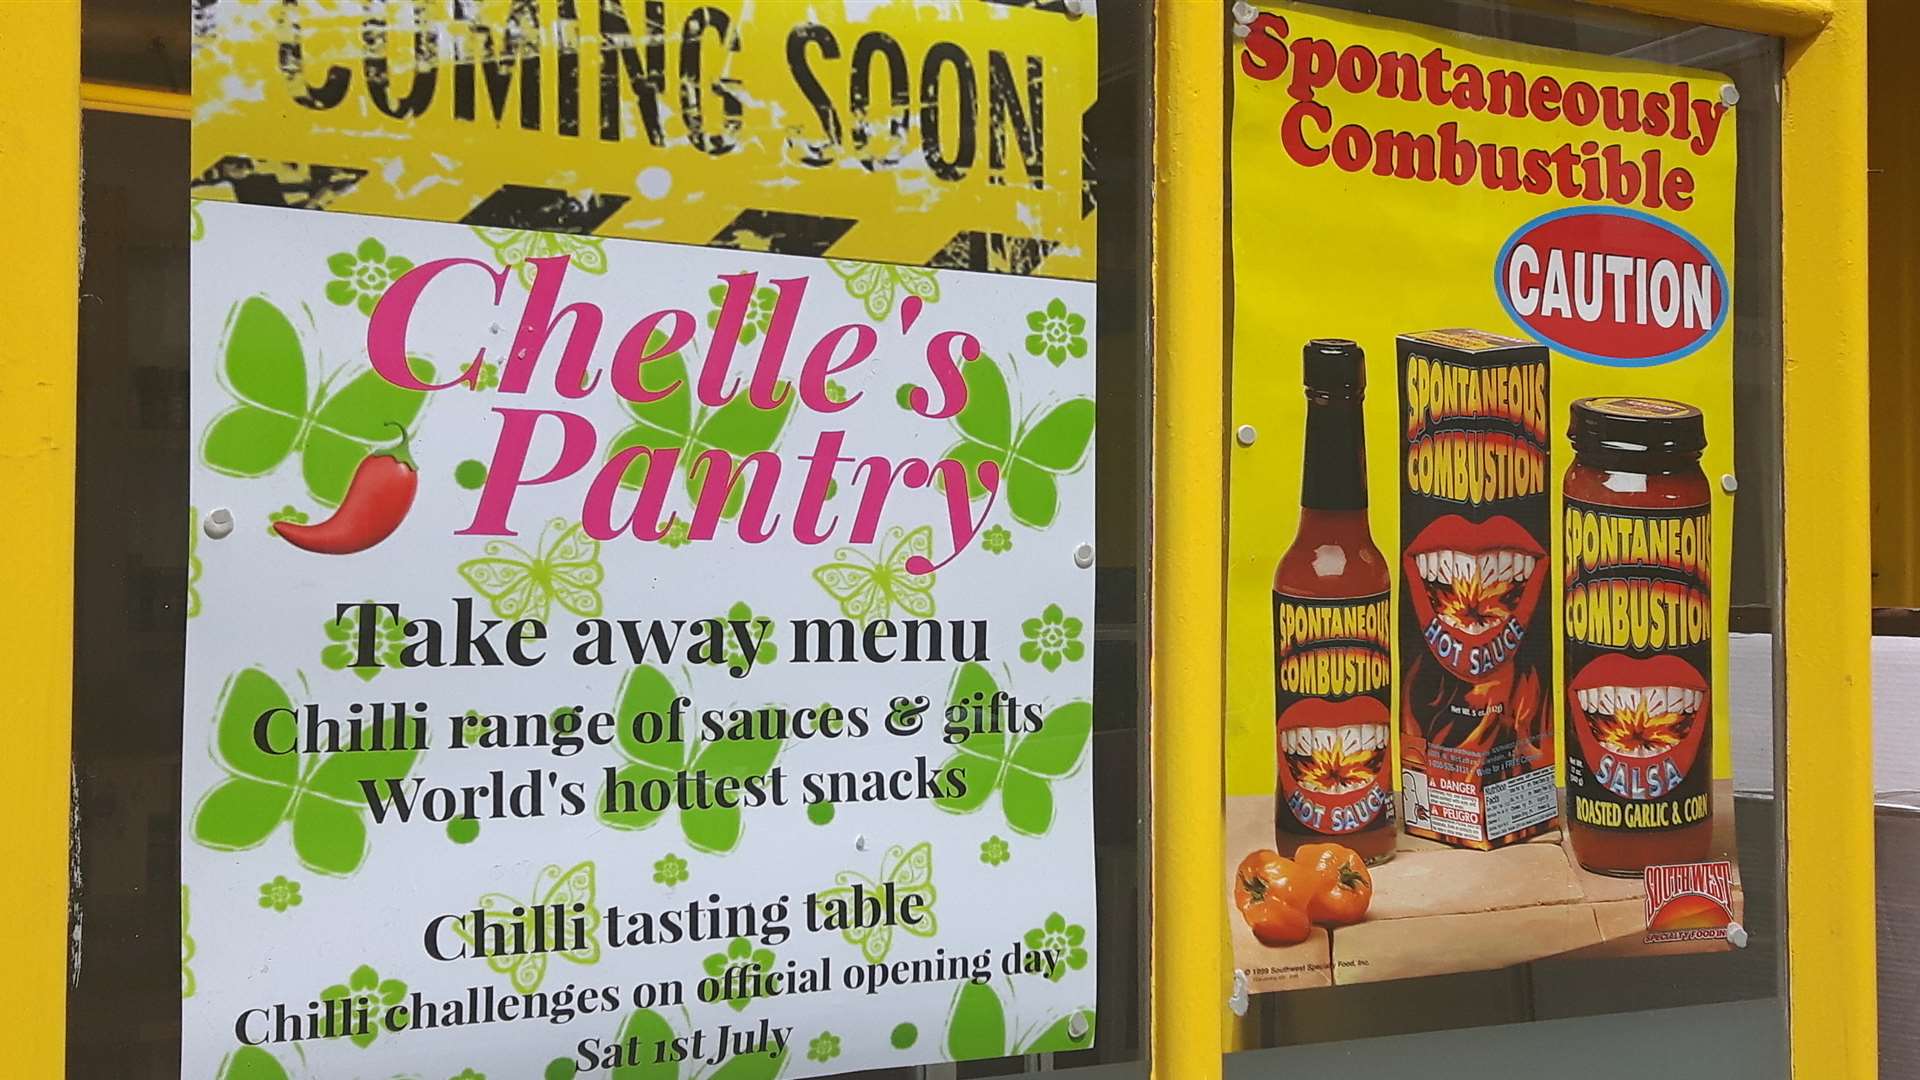 Chelle's Pantry in Rochester High Street